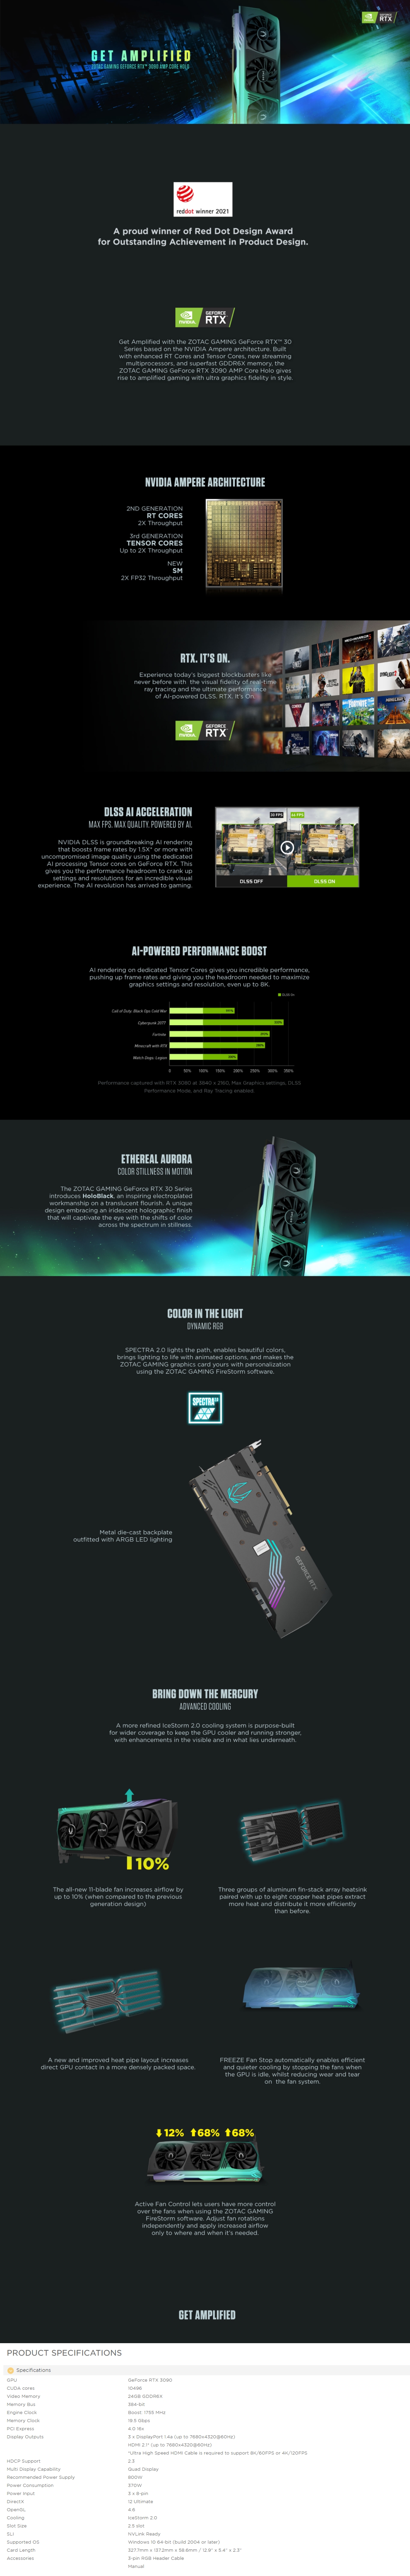 A large marketing image providing additional information about the product ZOTAC GAMING GeForce RTX 3090 AMP Core Holo 24GB GDDR6X - Additional alt info not provided